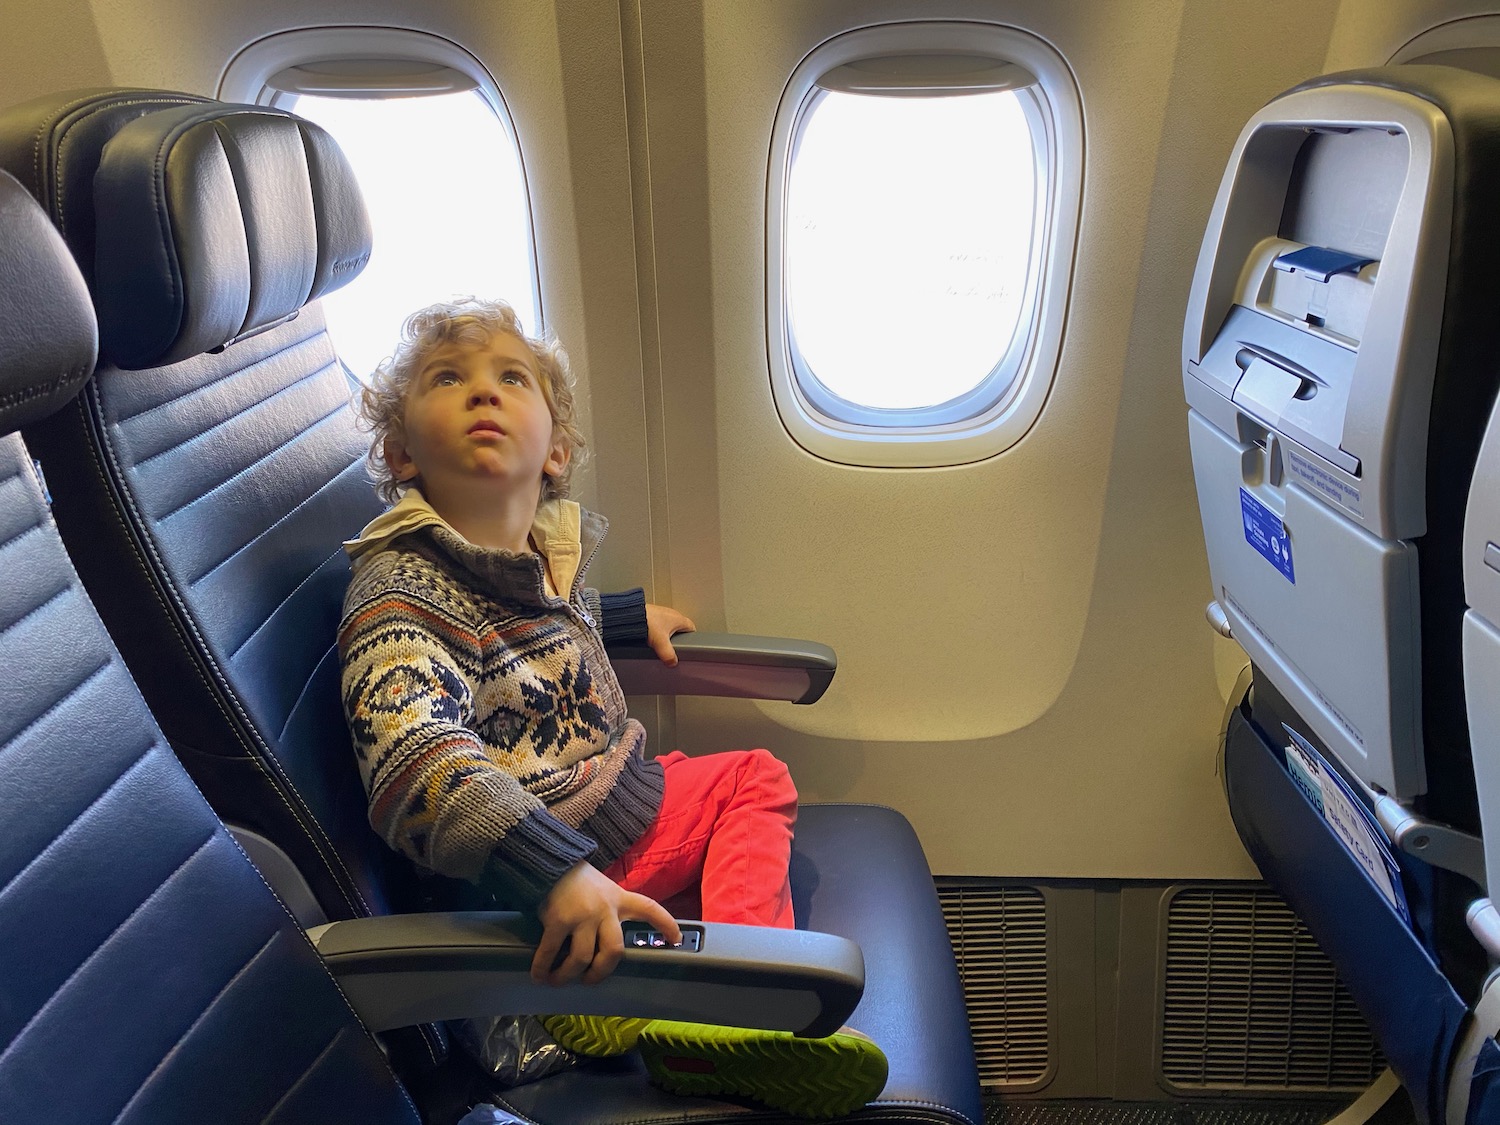 a child sitting in a plane